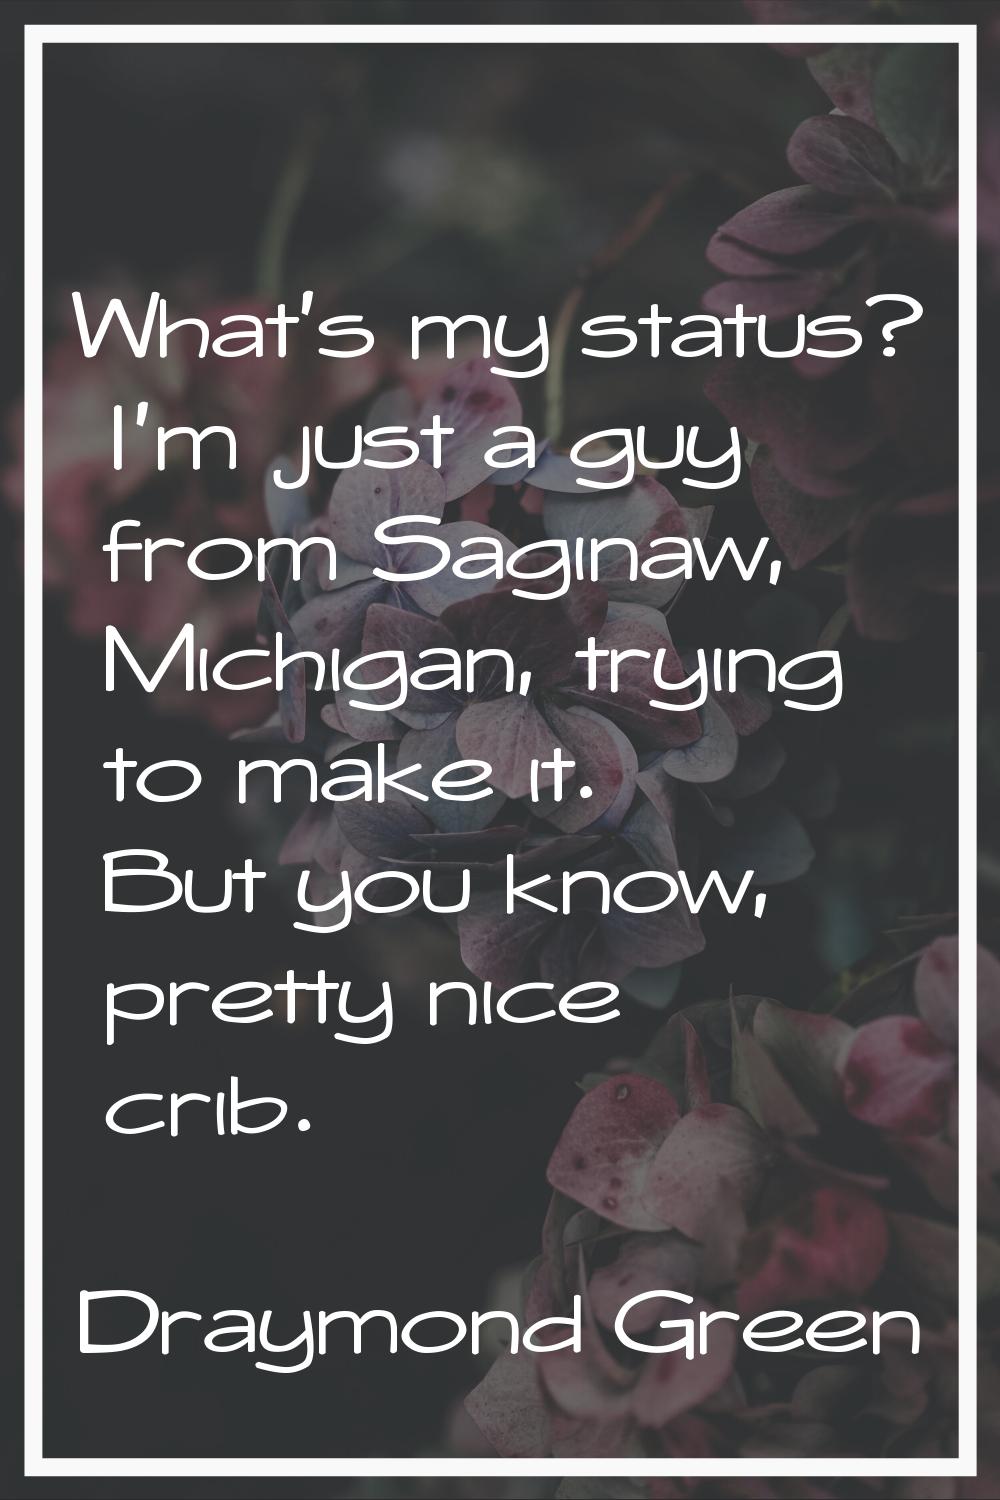 What's my status? I'm just a guy from Saginaw, Michigan, trying to make it. But you know, pretty ni